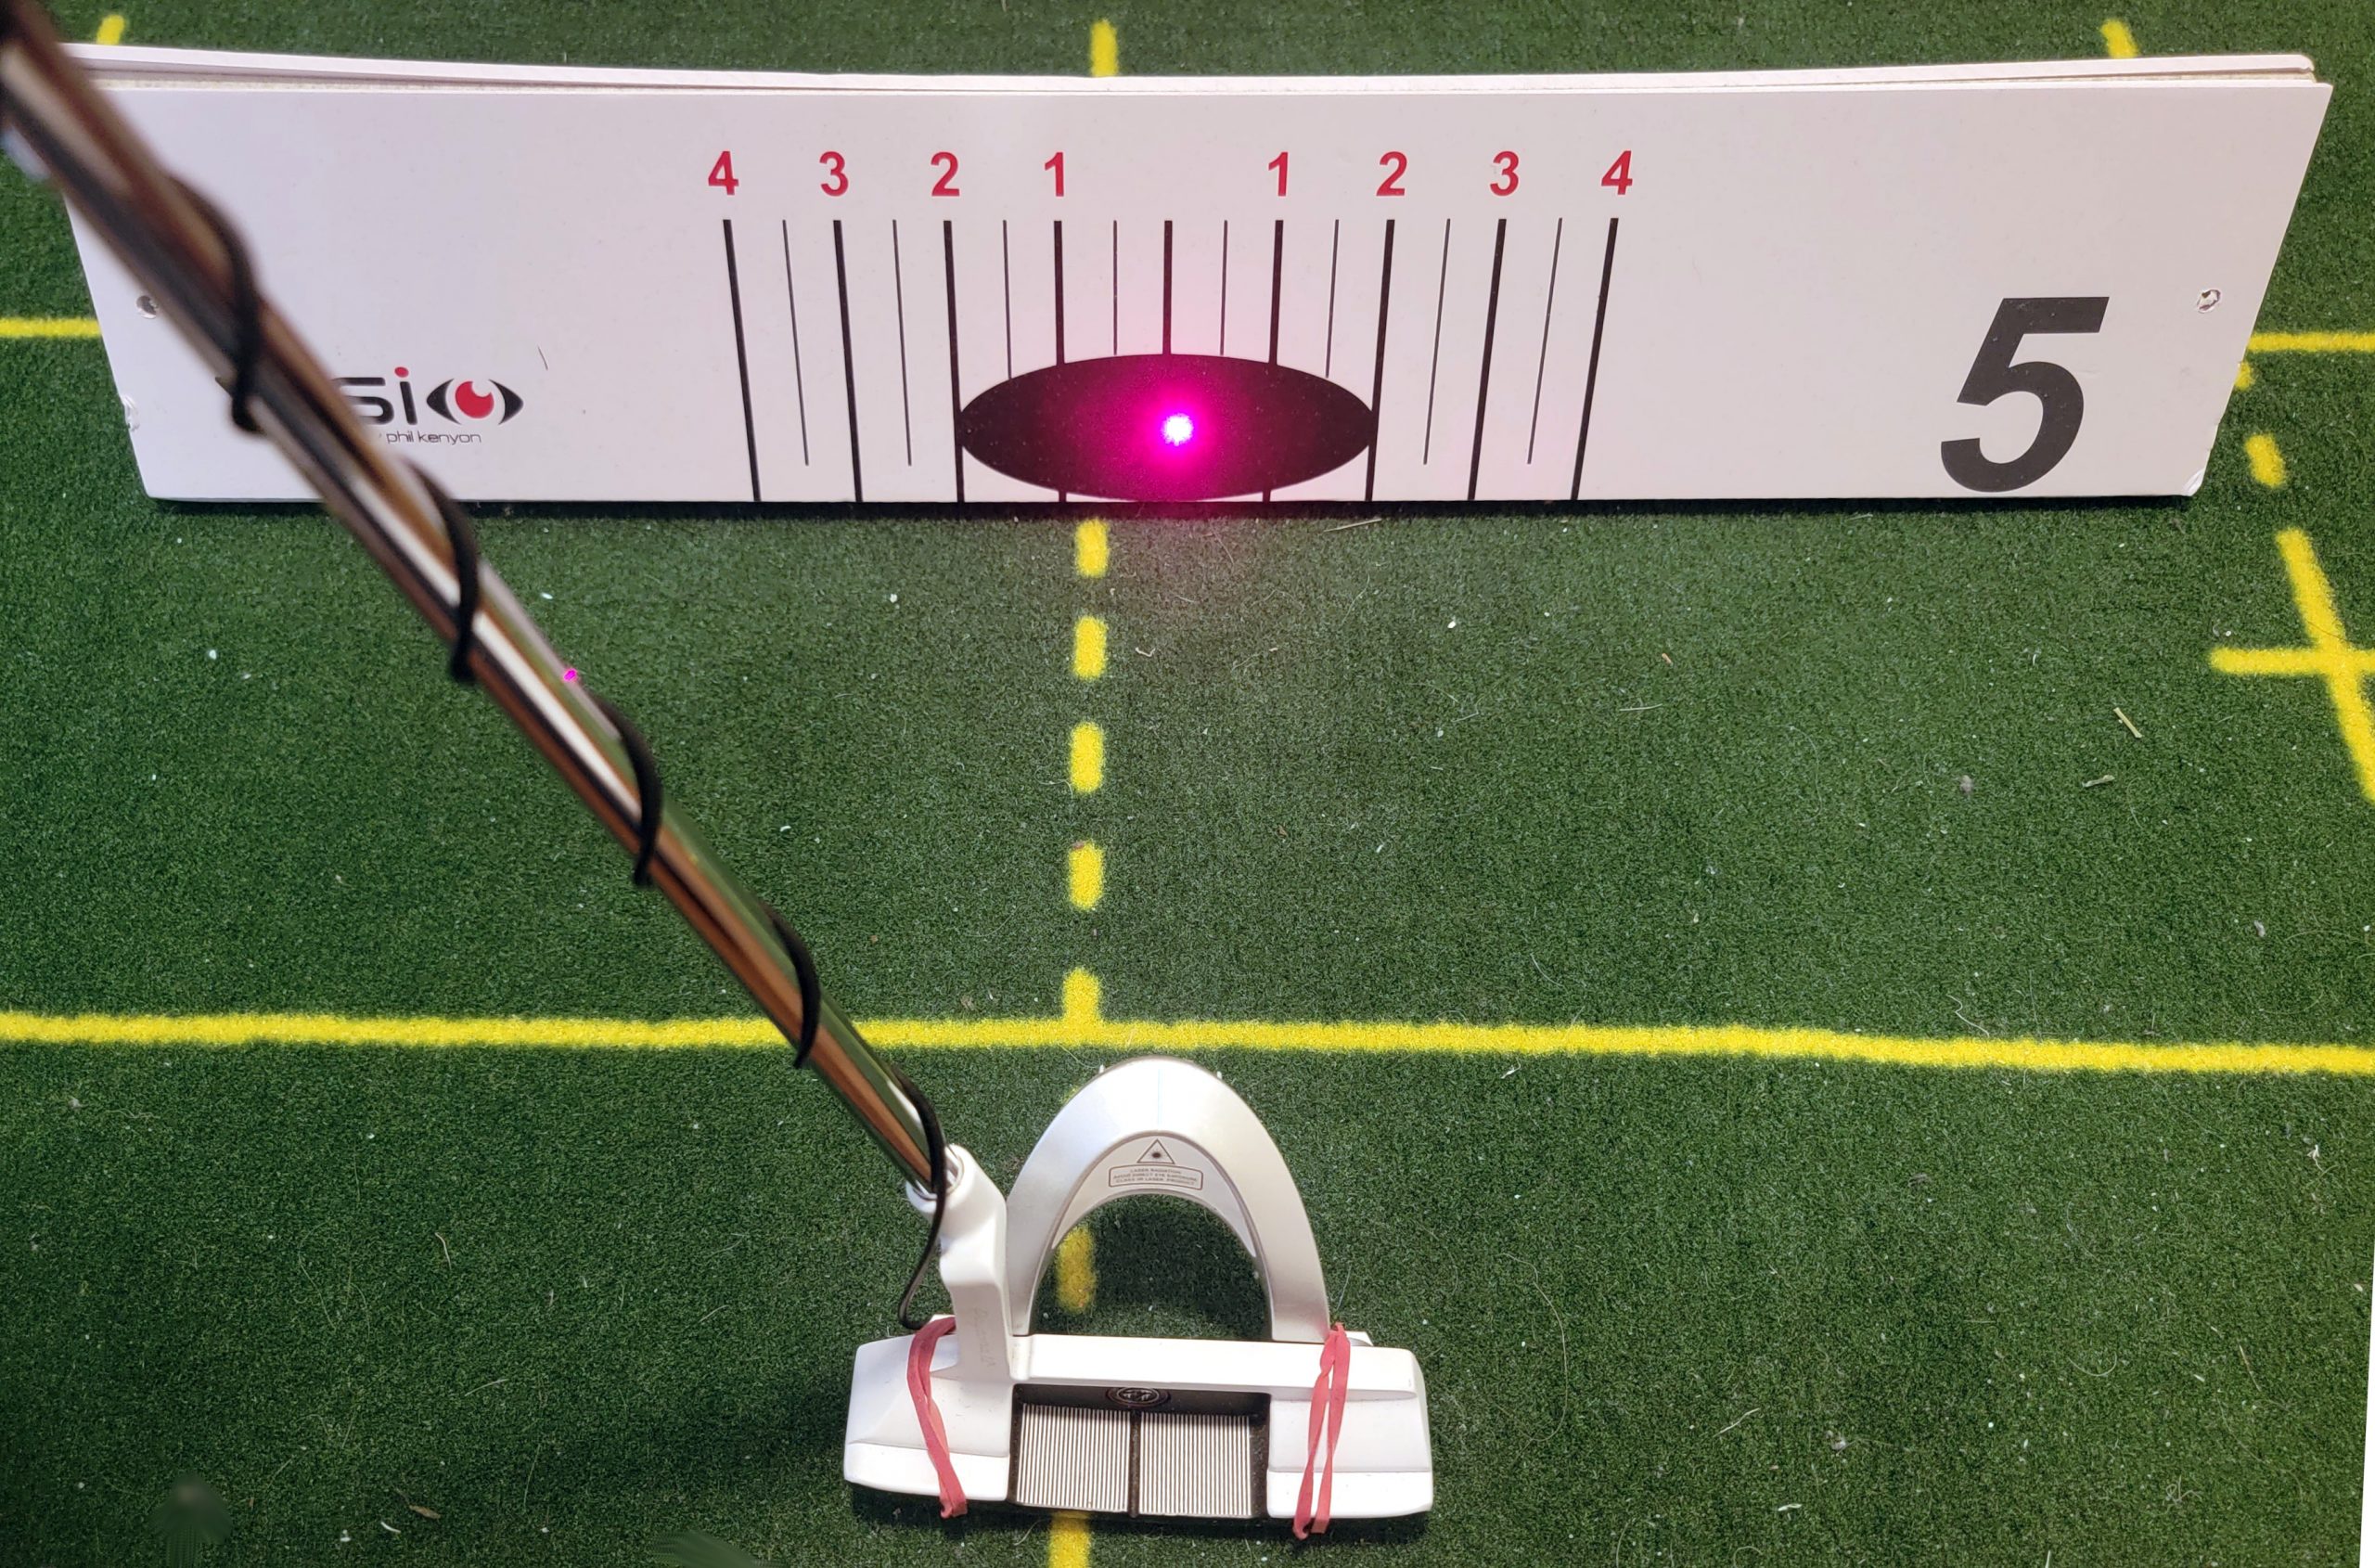 Old Duffer Golf image of a laser aimer for indoor putting drills: aim